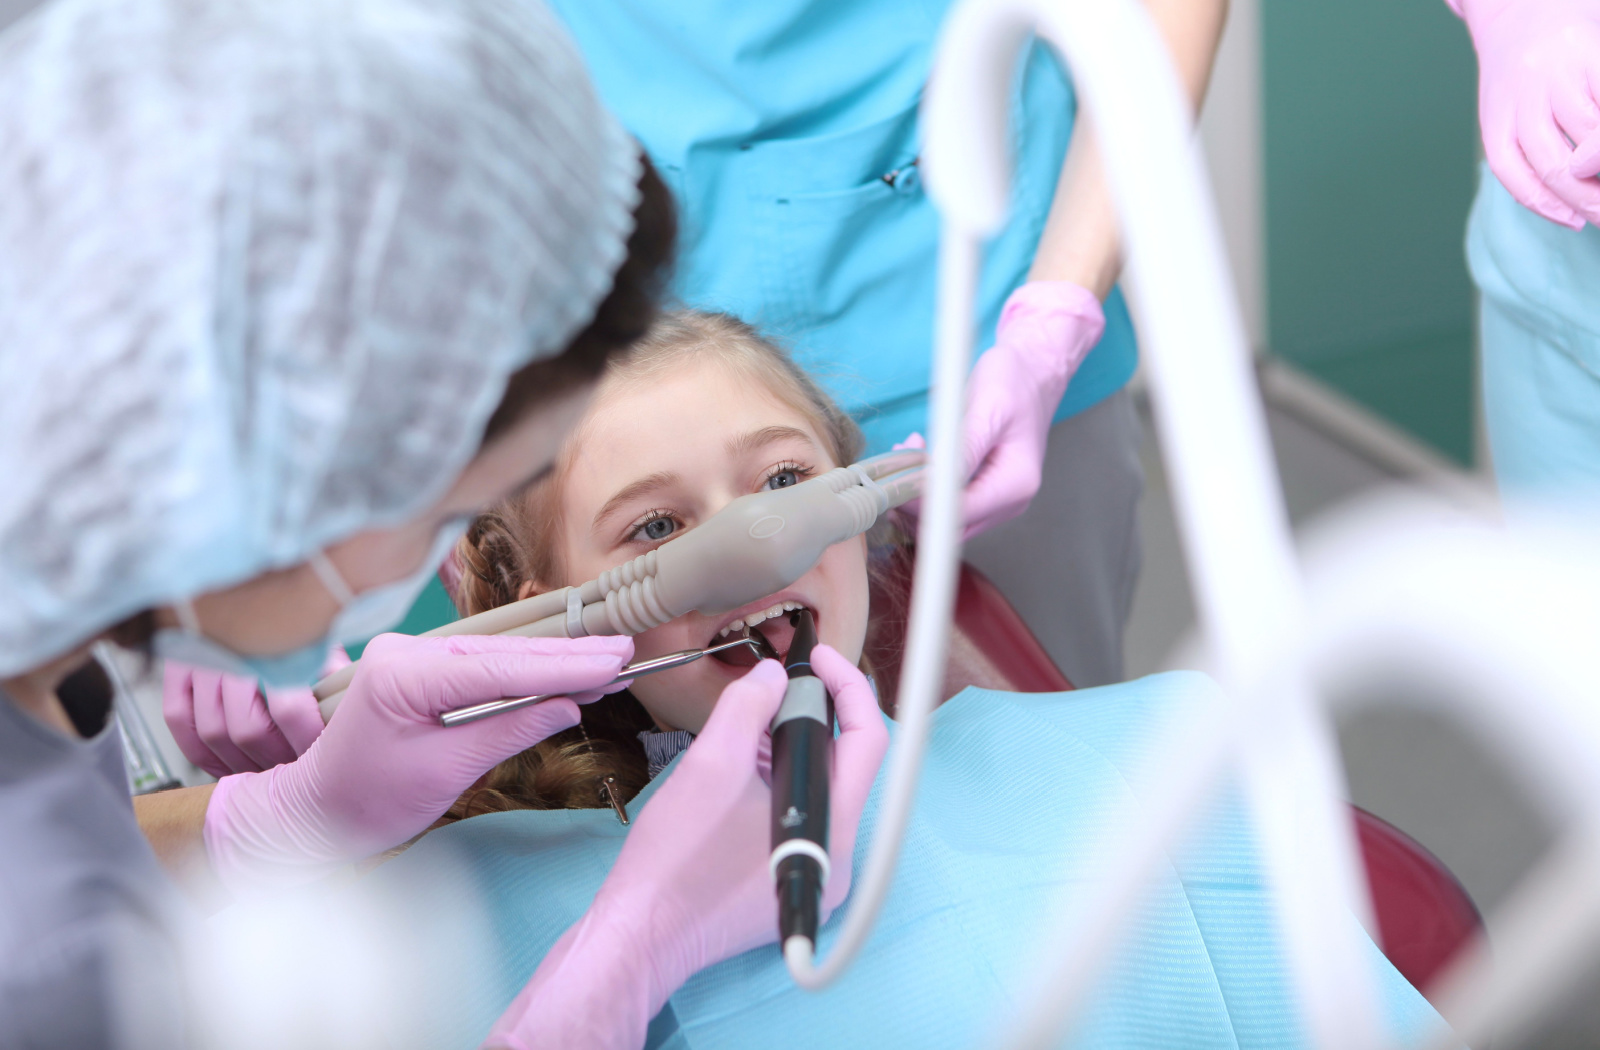 A female child is in a sedated state, wearing a sedation mask, as she undergoes a dental cleaning administered by a woman dentist.
